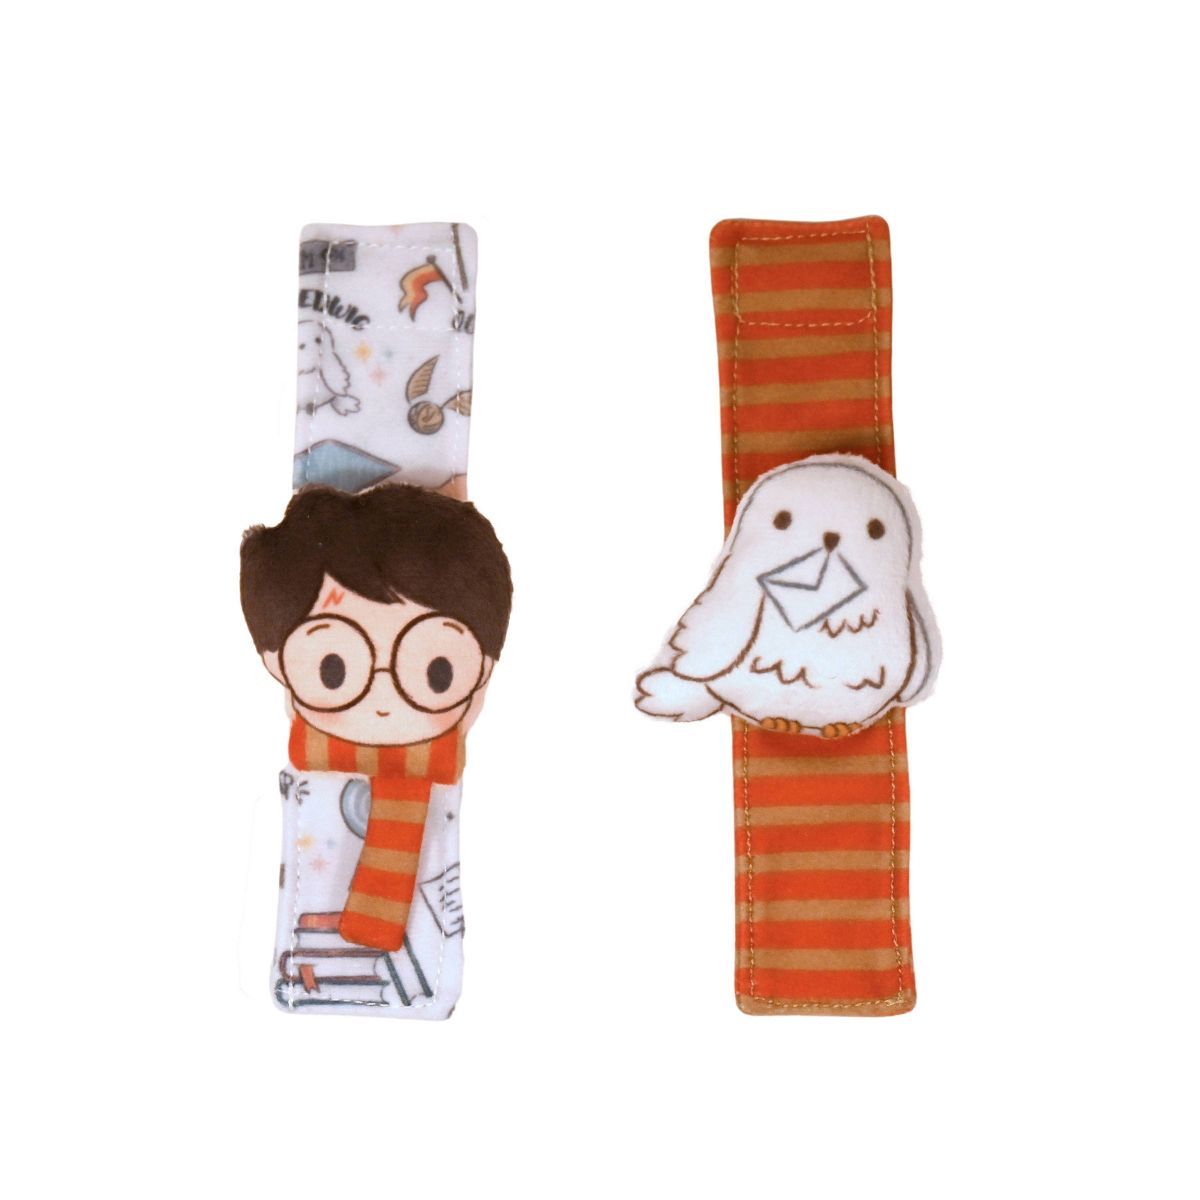 Harry Potter and Hedwig Wrist Rattle | Target